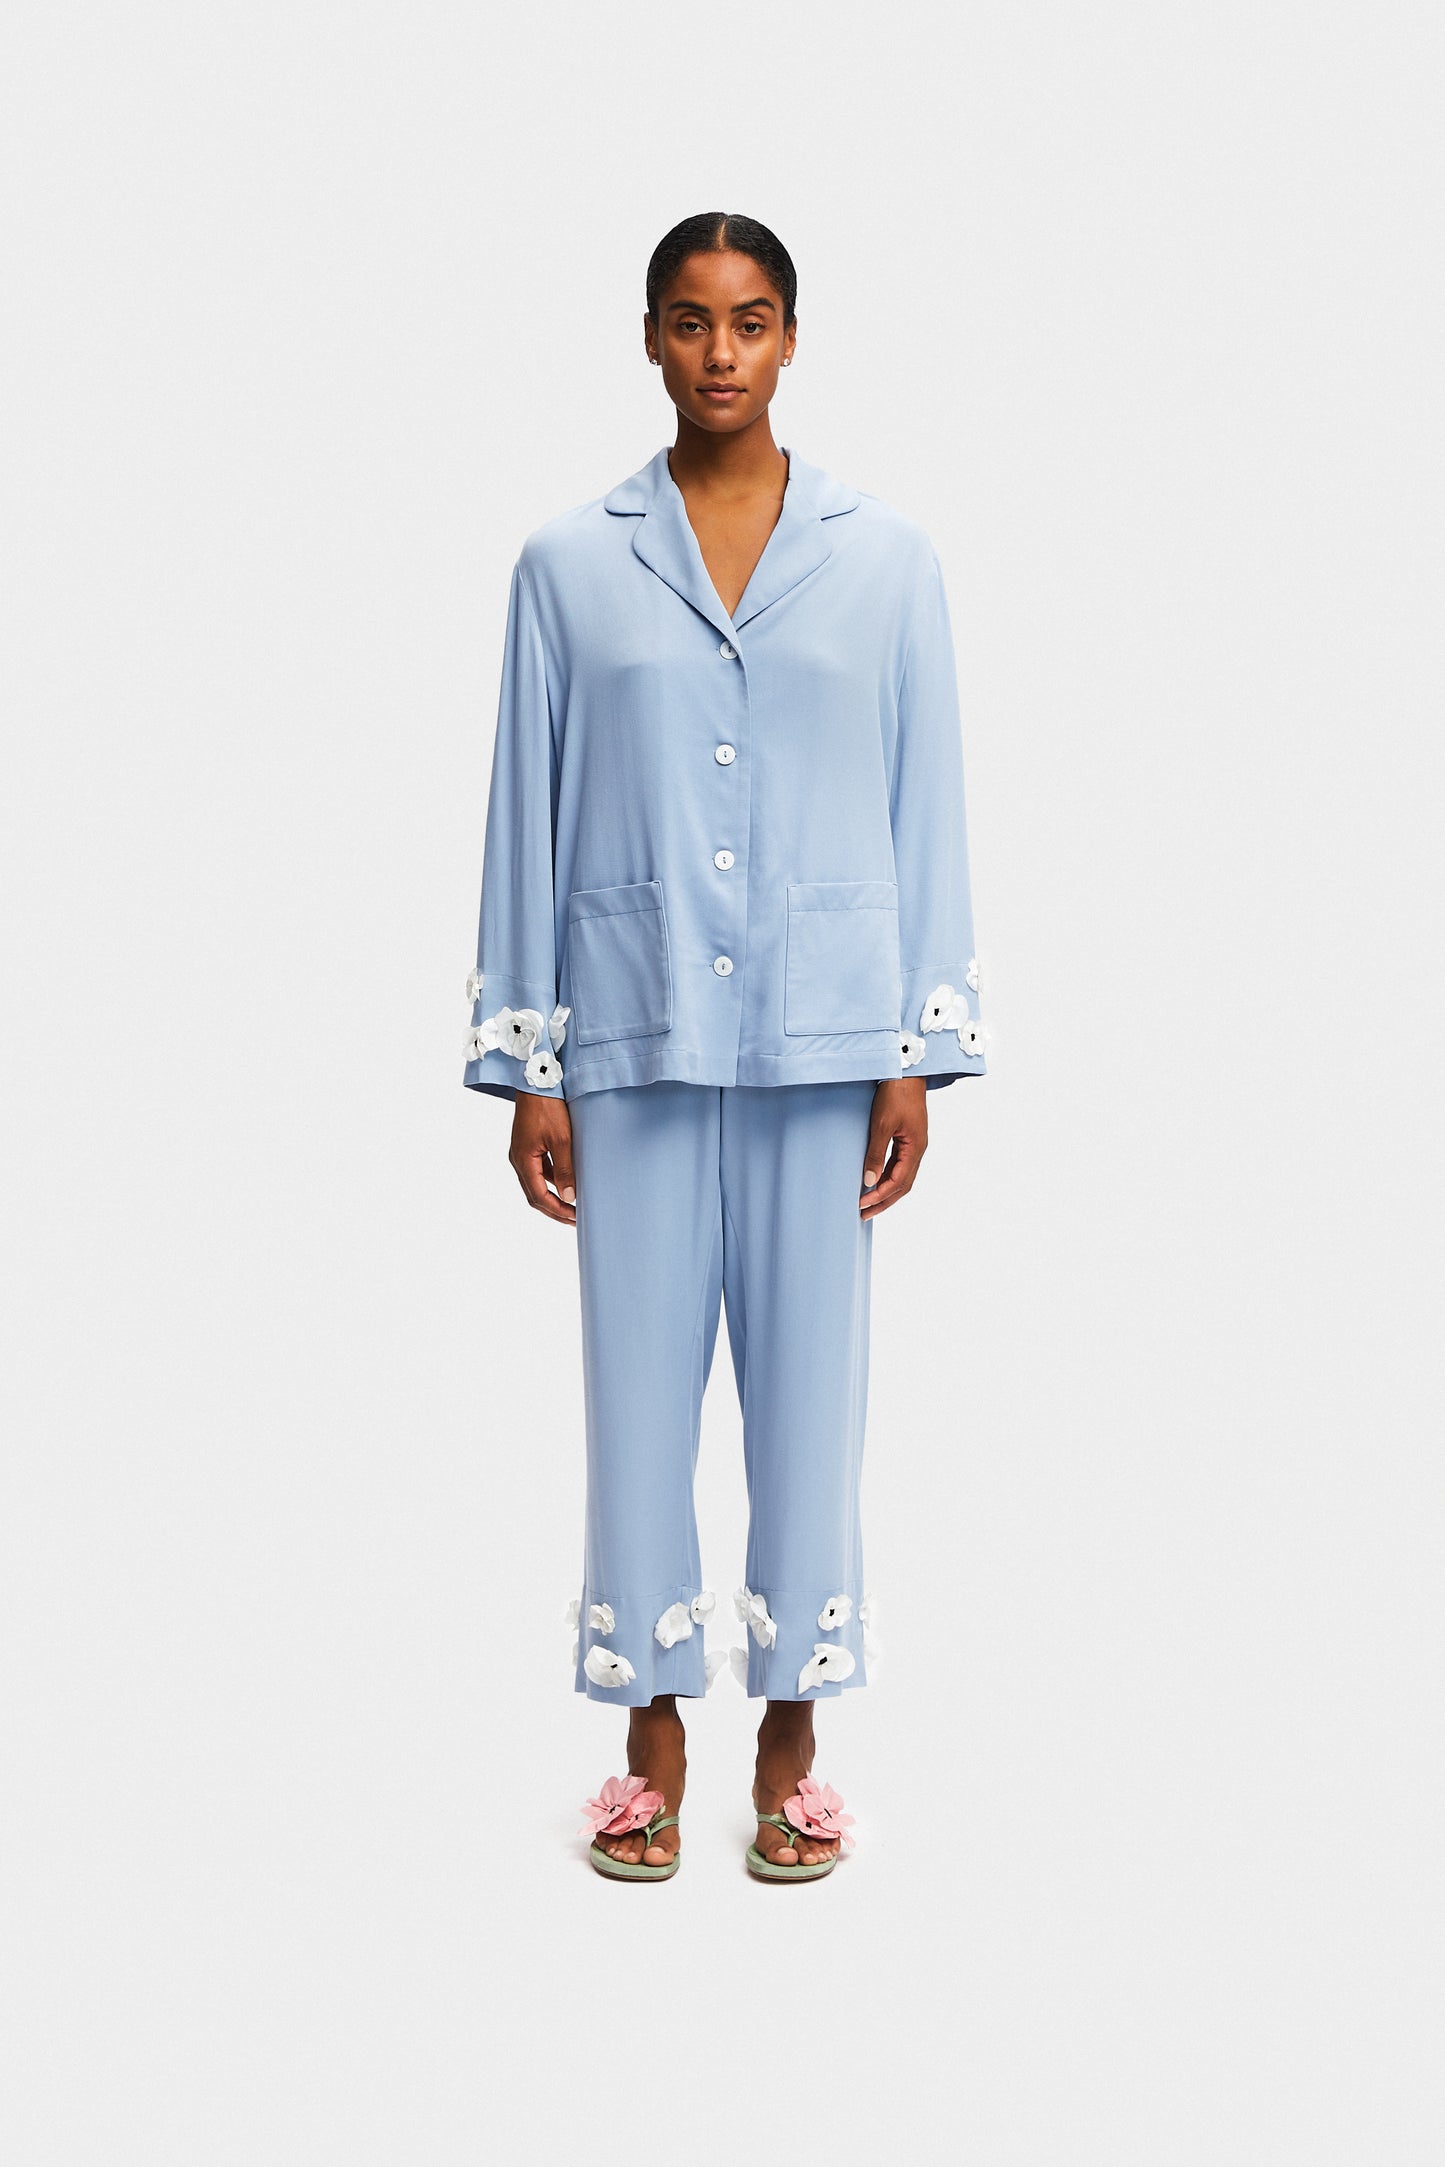 The Bloom Party Pajama Set with Pants in Black